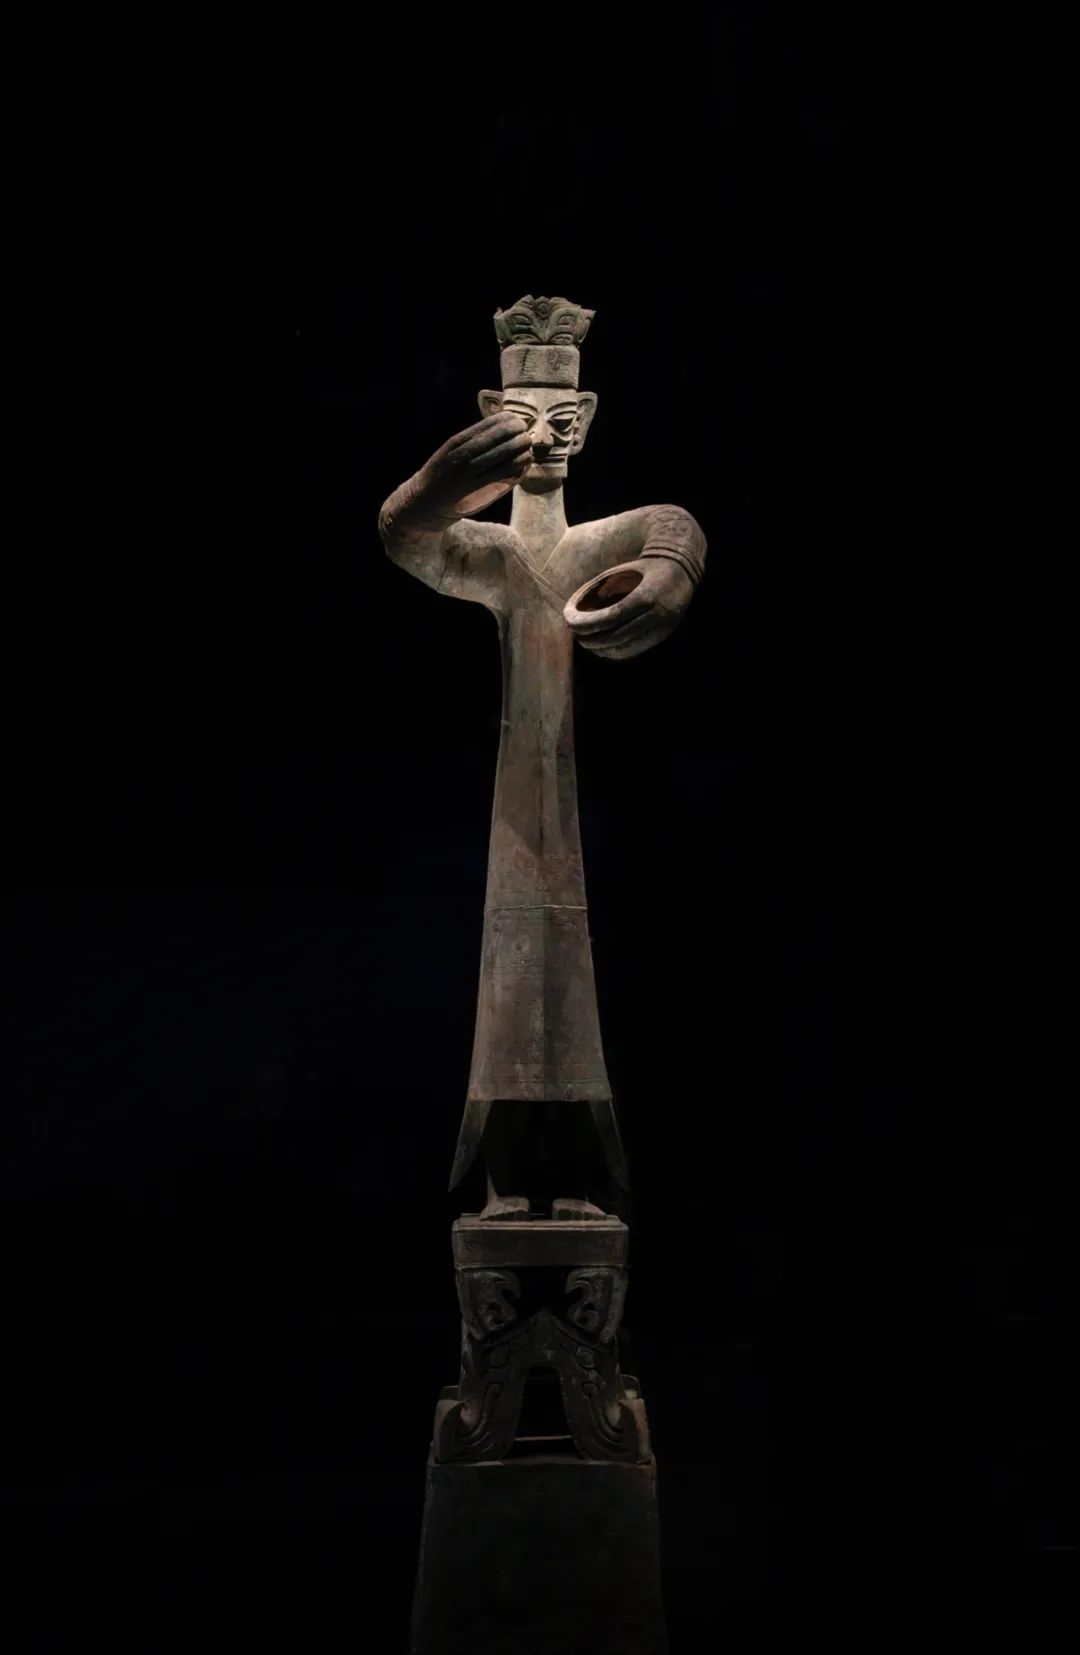 Windwing - SanXingDui：Bronze Casted Mysterious And Gold Painted Puzzles